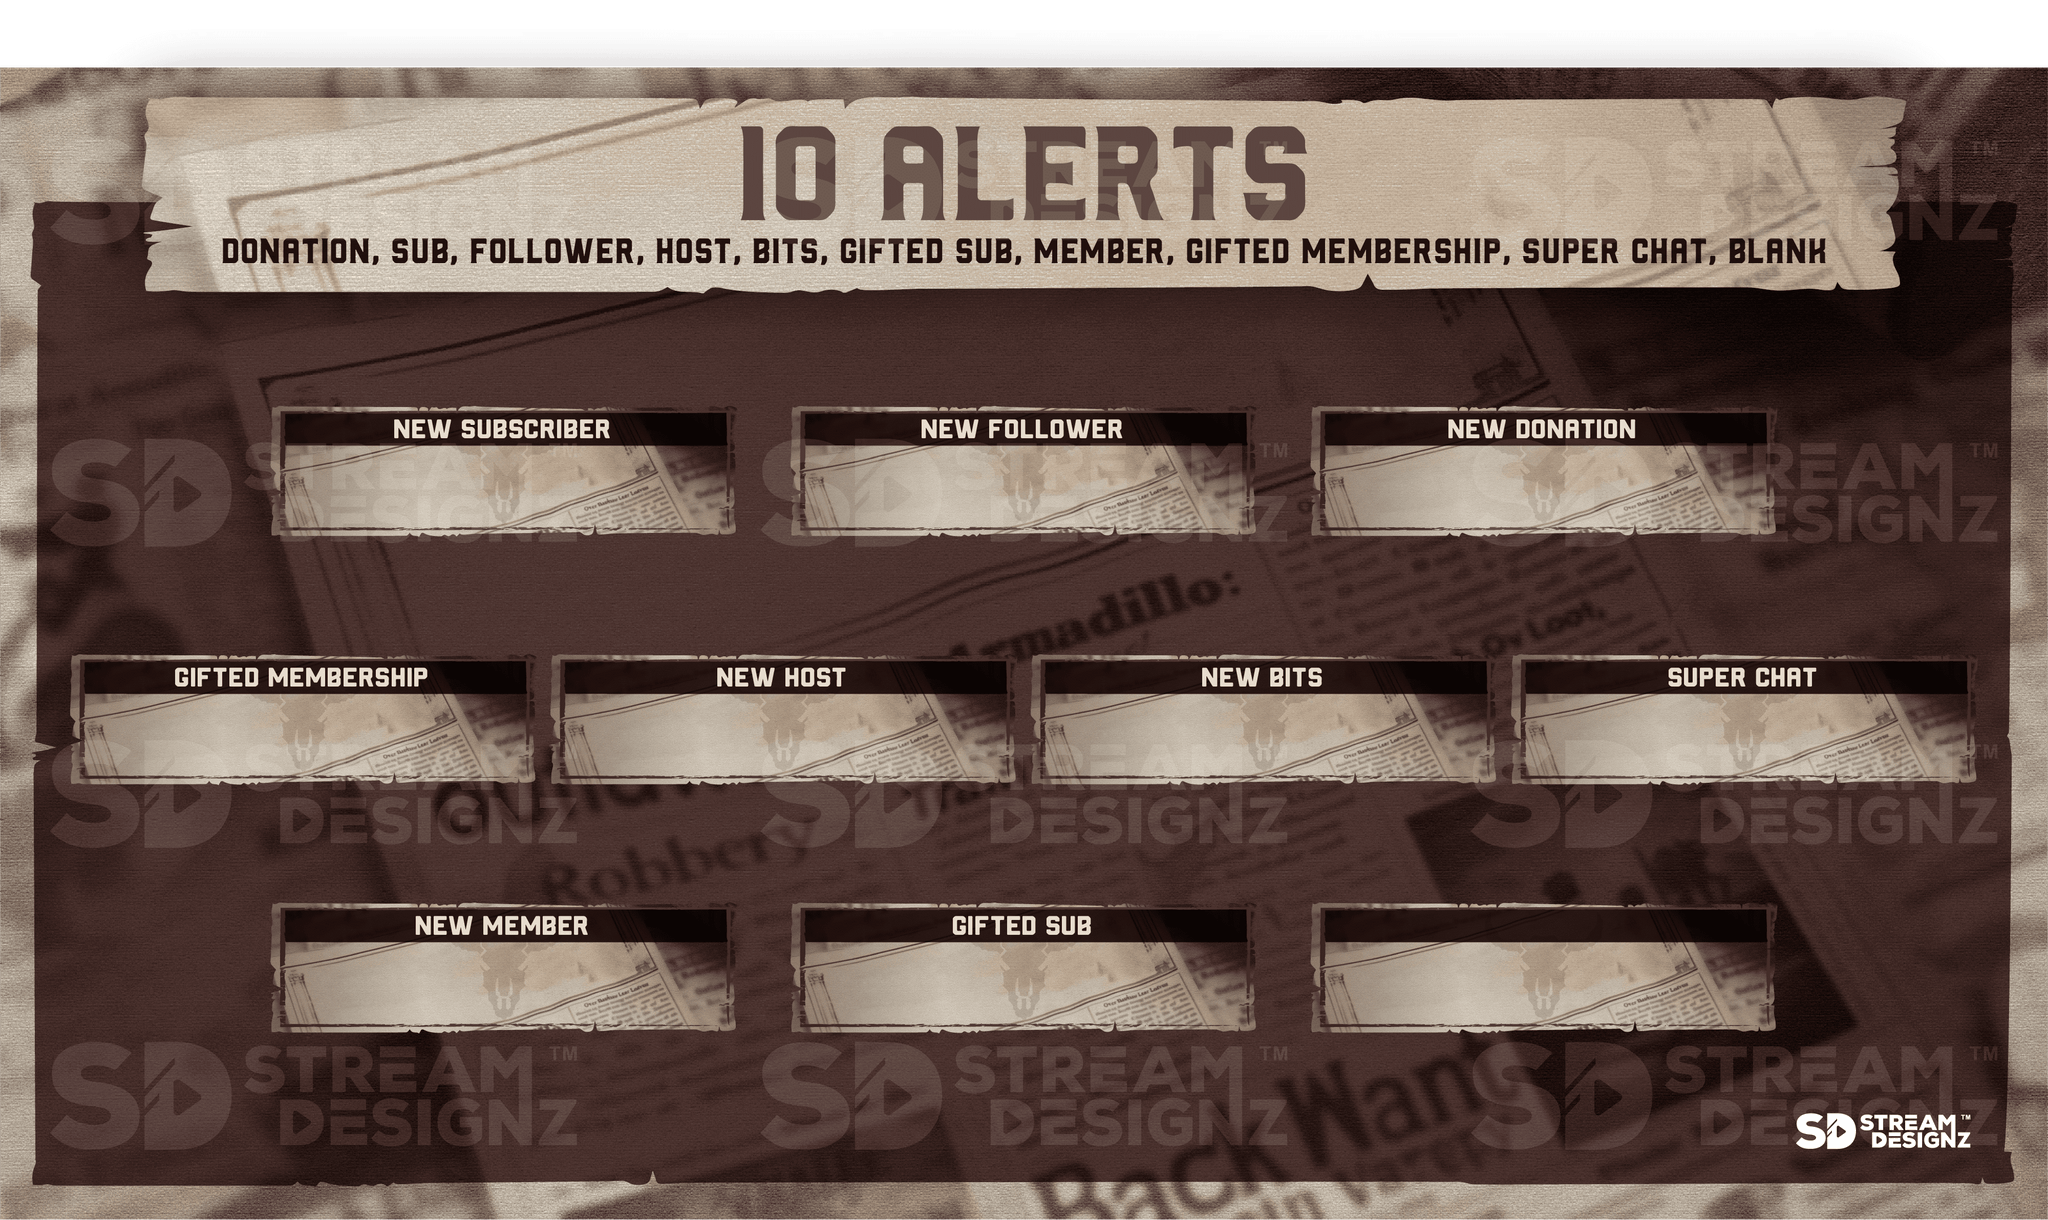 Ultimate stream package 10 alerts outlaw stream designz